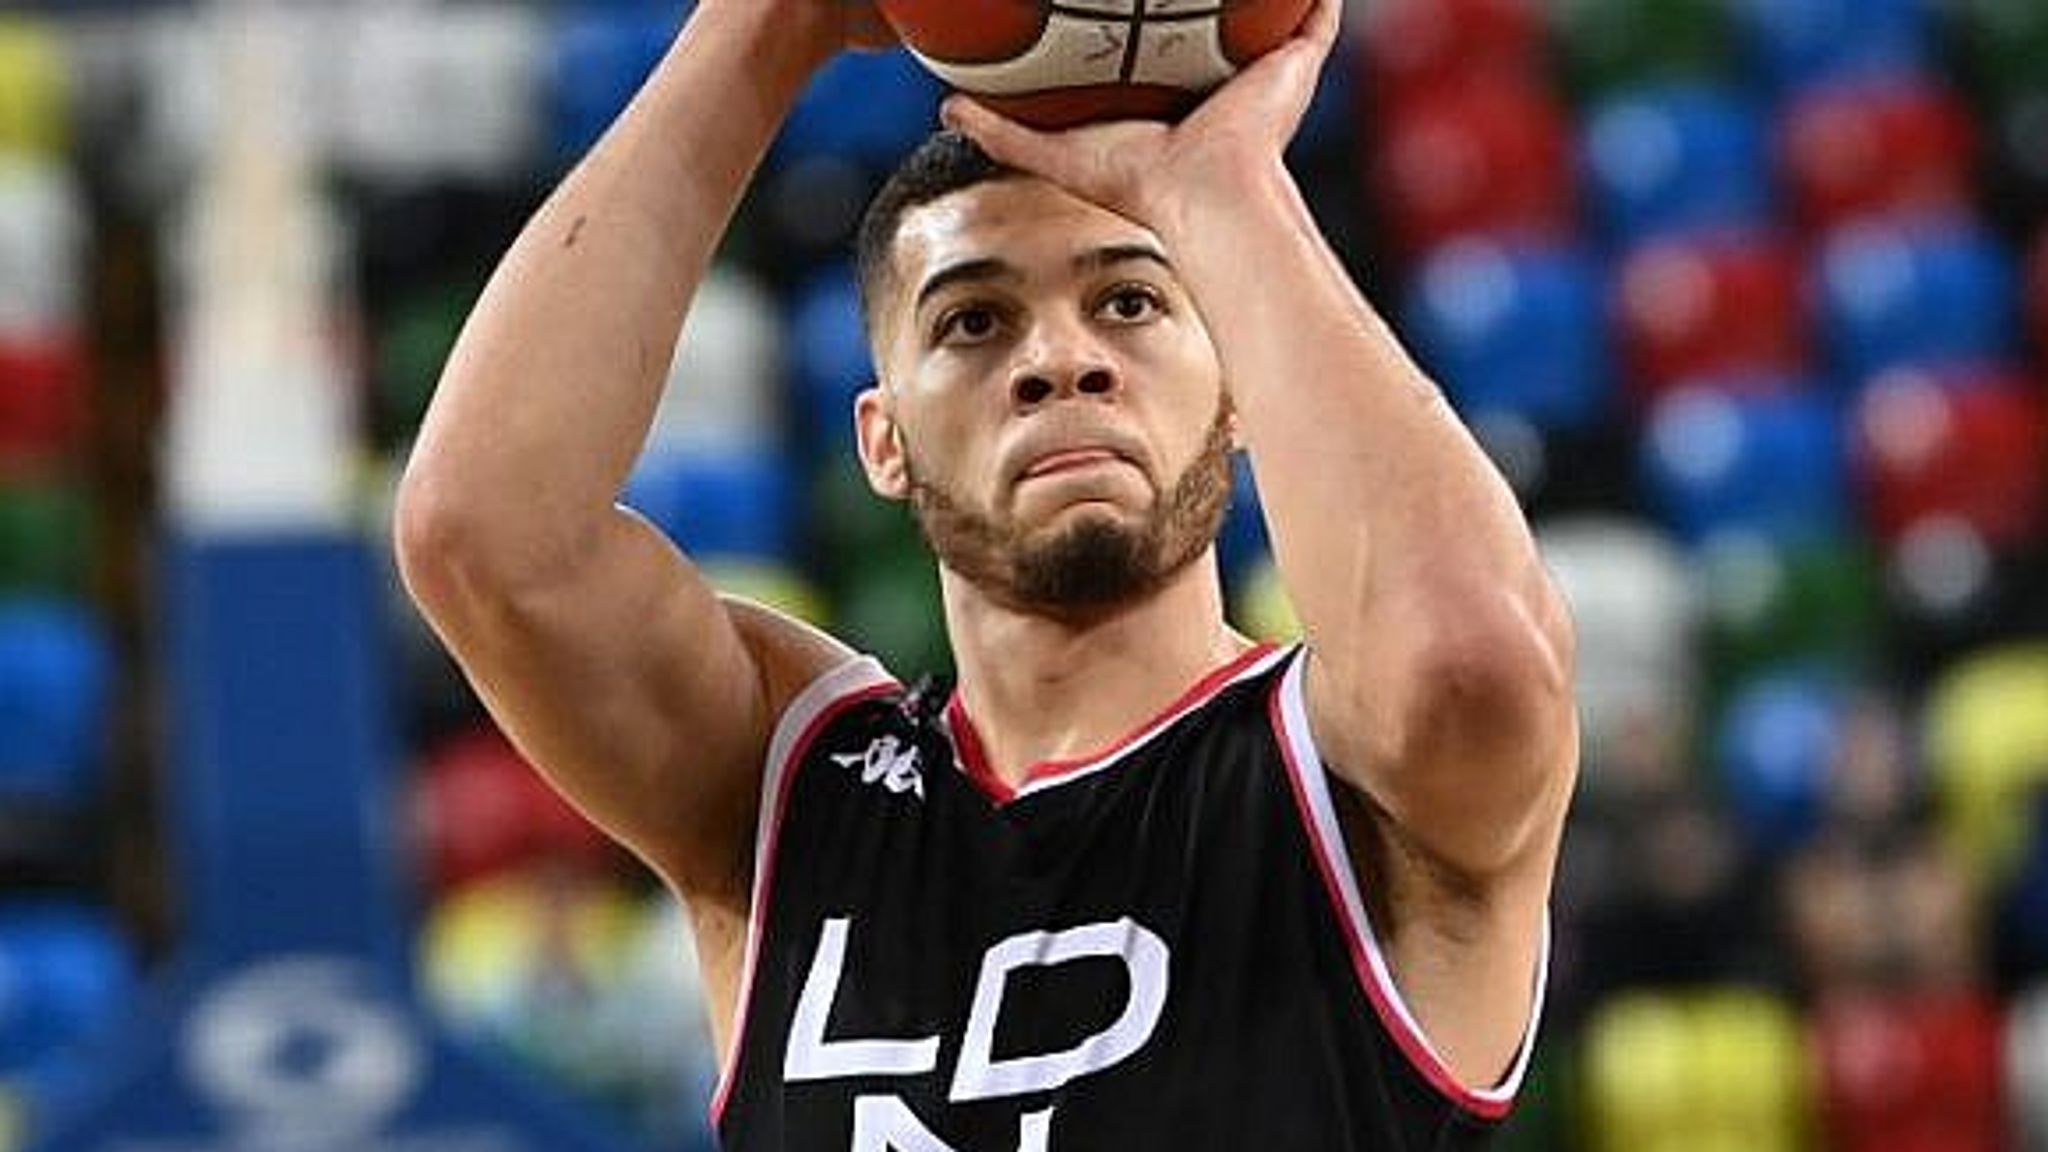 British Basketball League Live streams from BBL on Sky Sports YouTube channel Basketball News Sky Sports